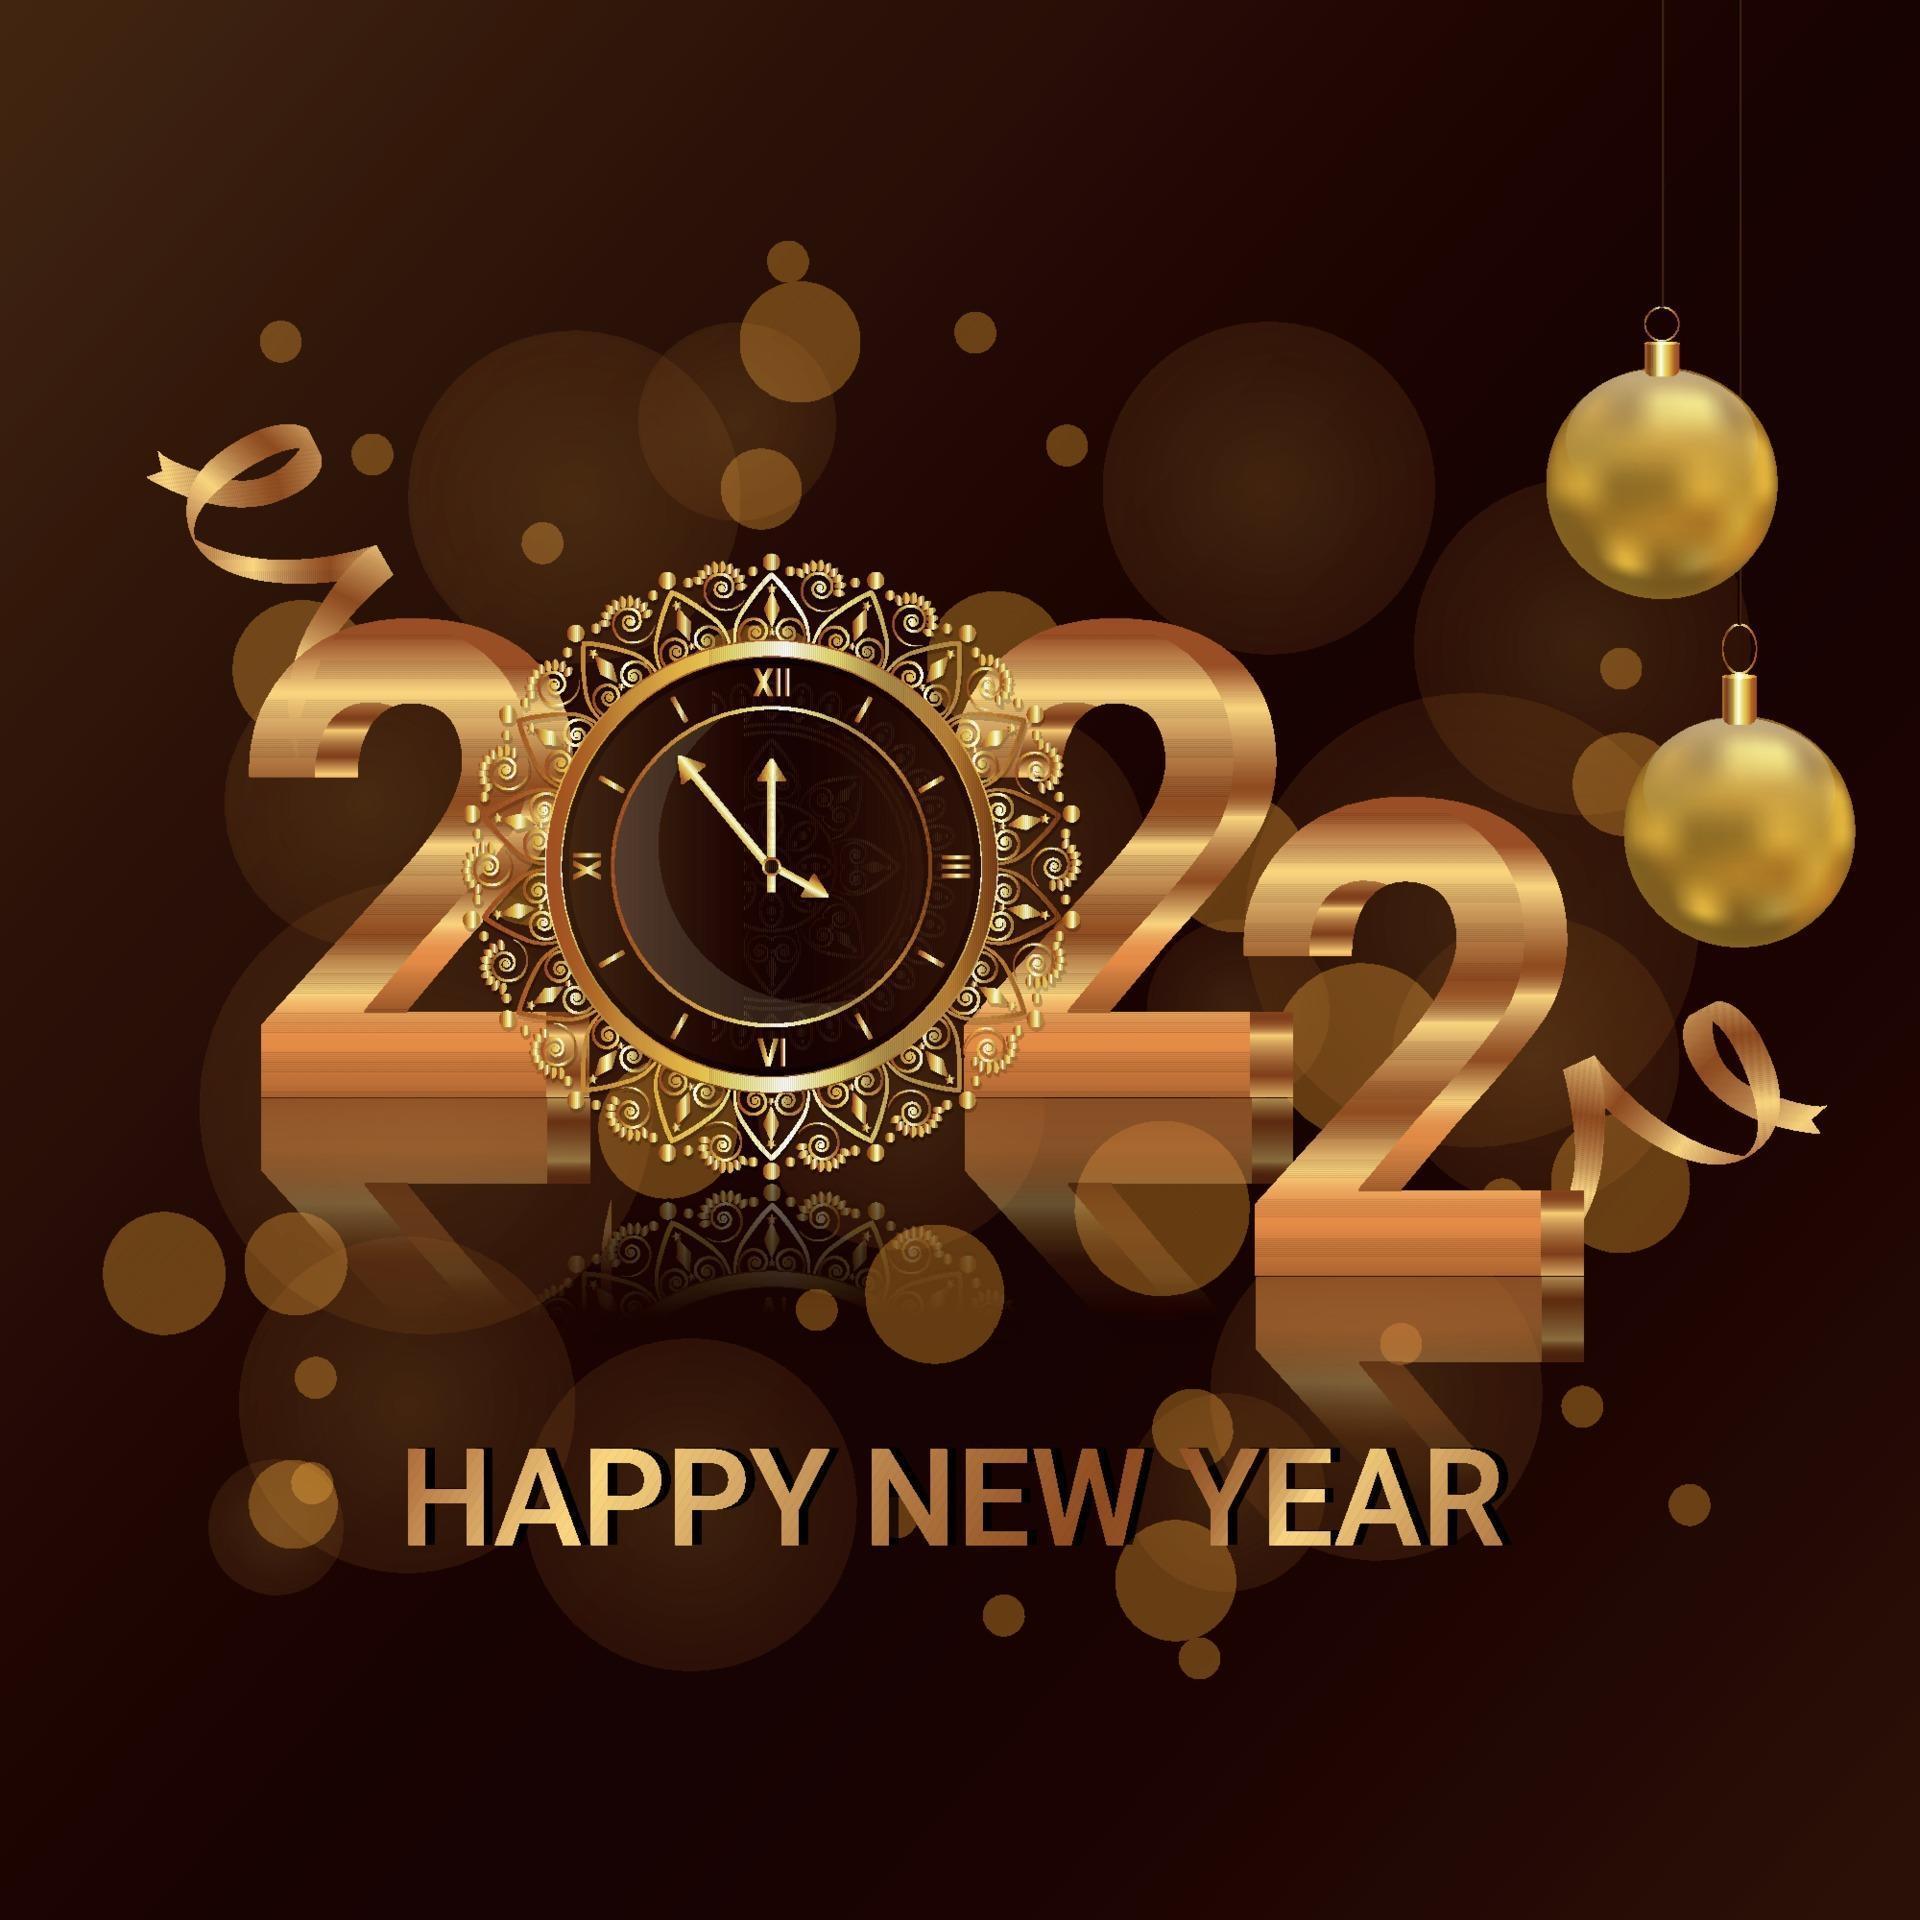 Happy new year 2022 wishes for whatsapp